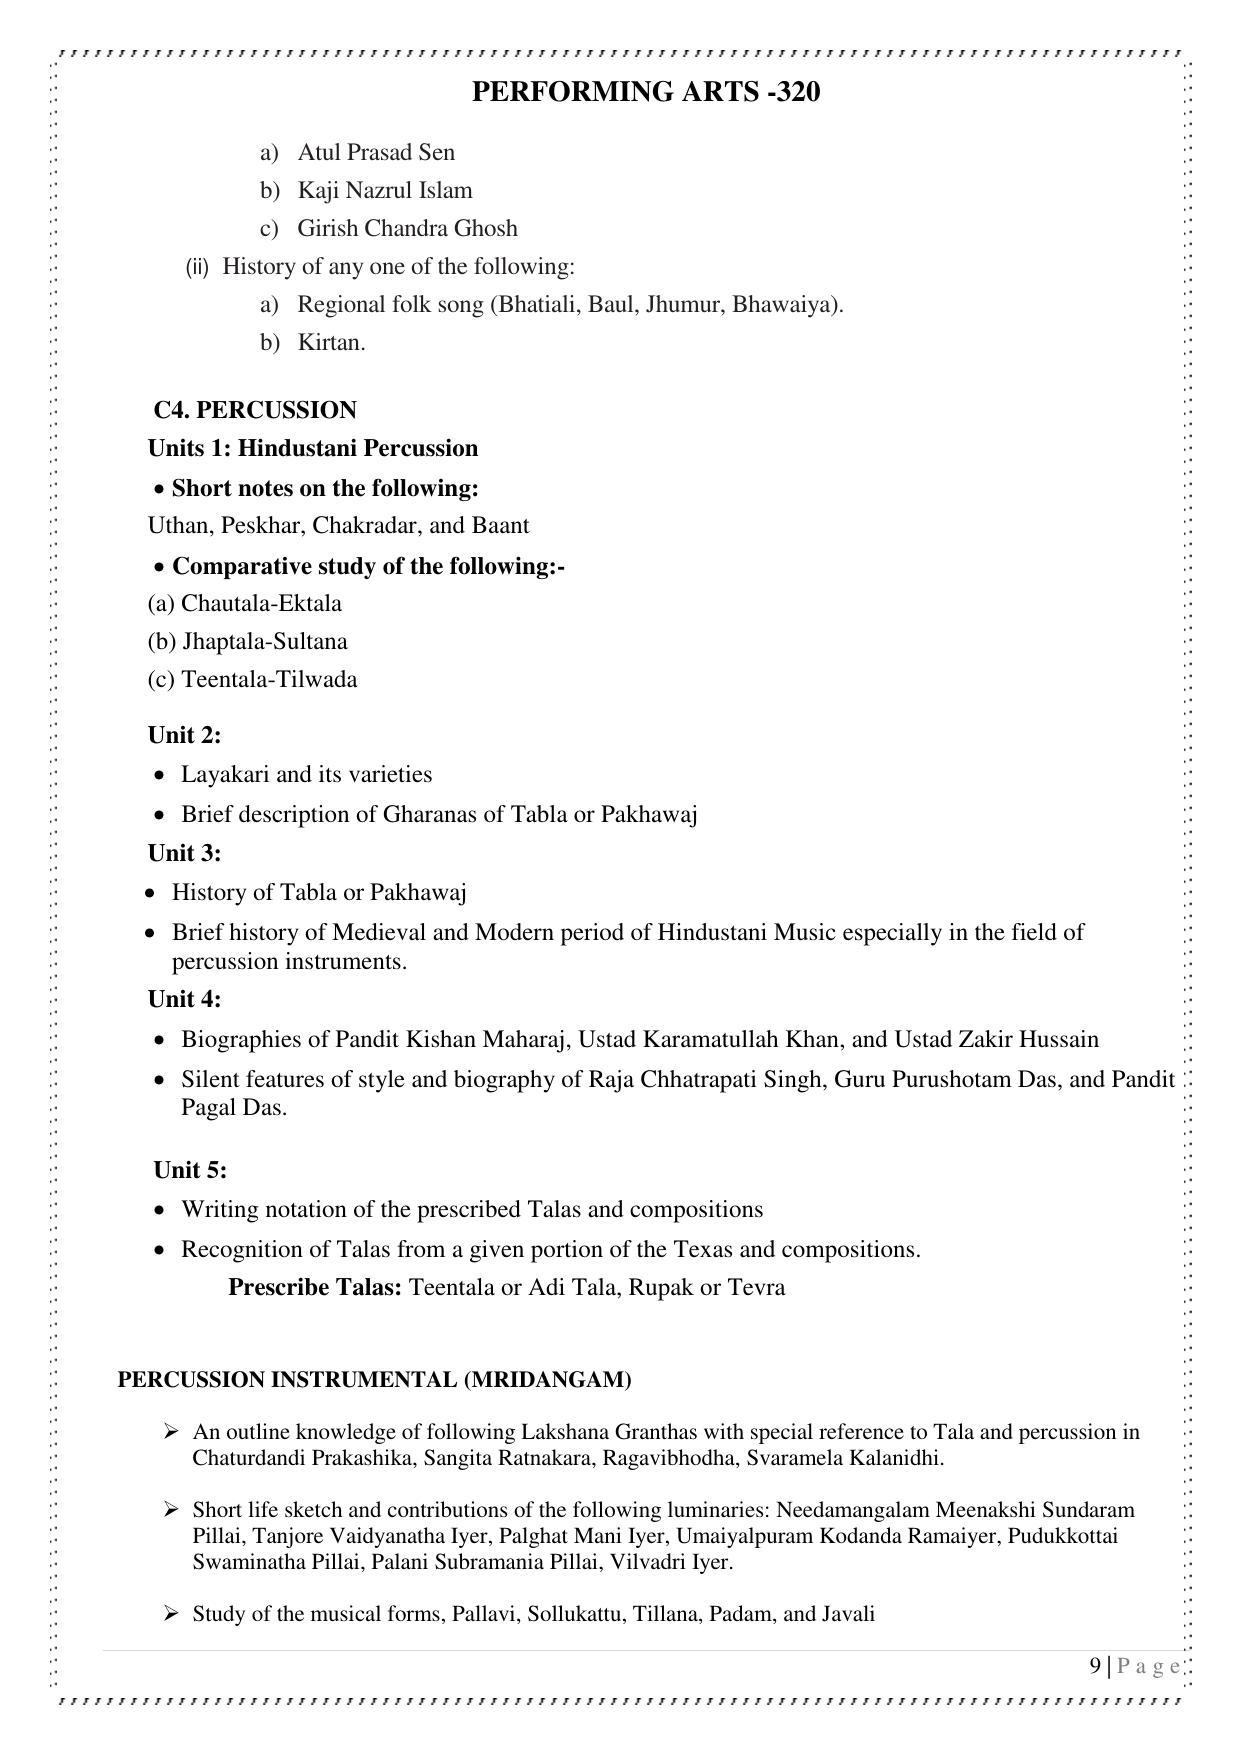 CUET Syllabus for Performing Arts (English) - Page 9